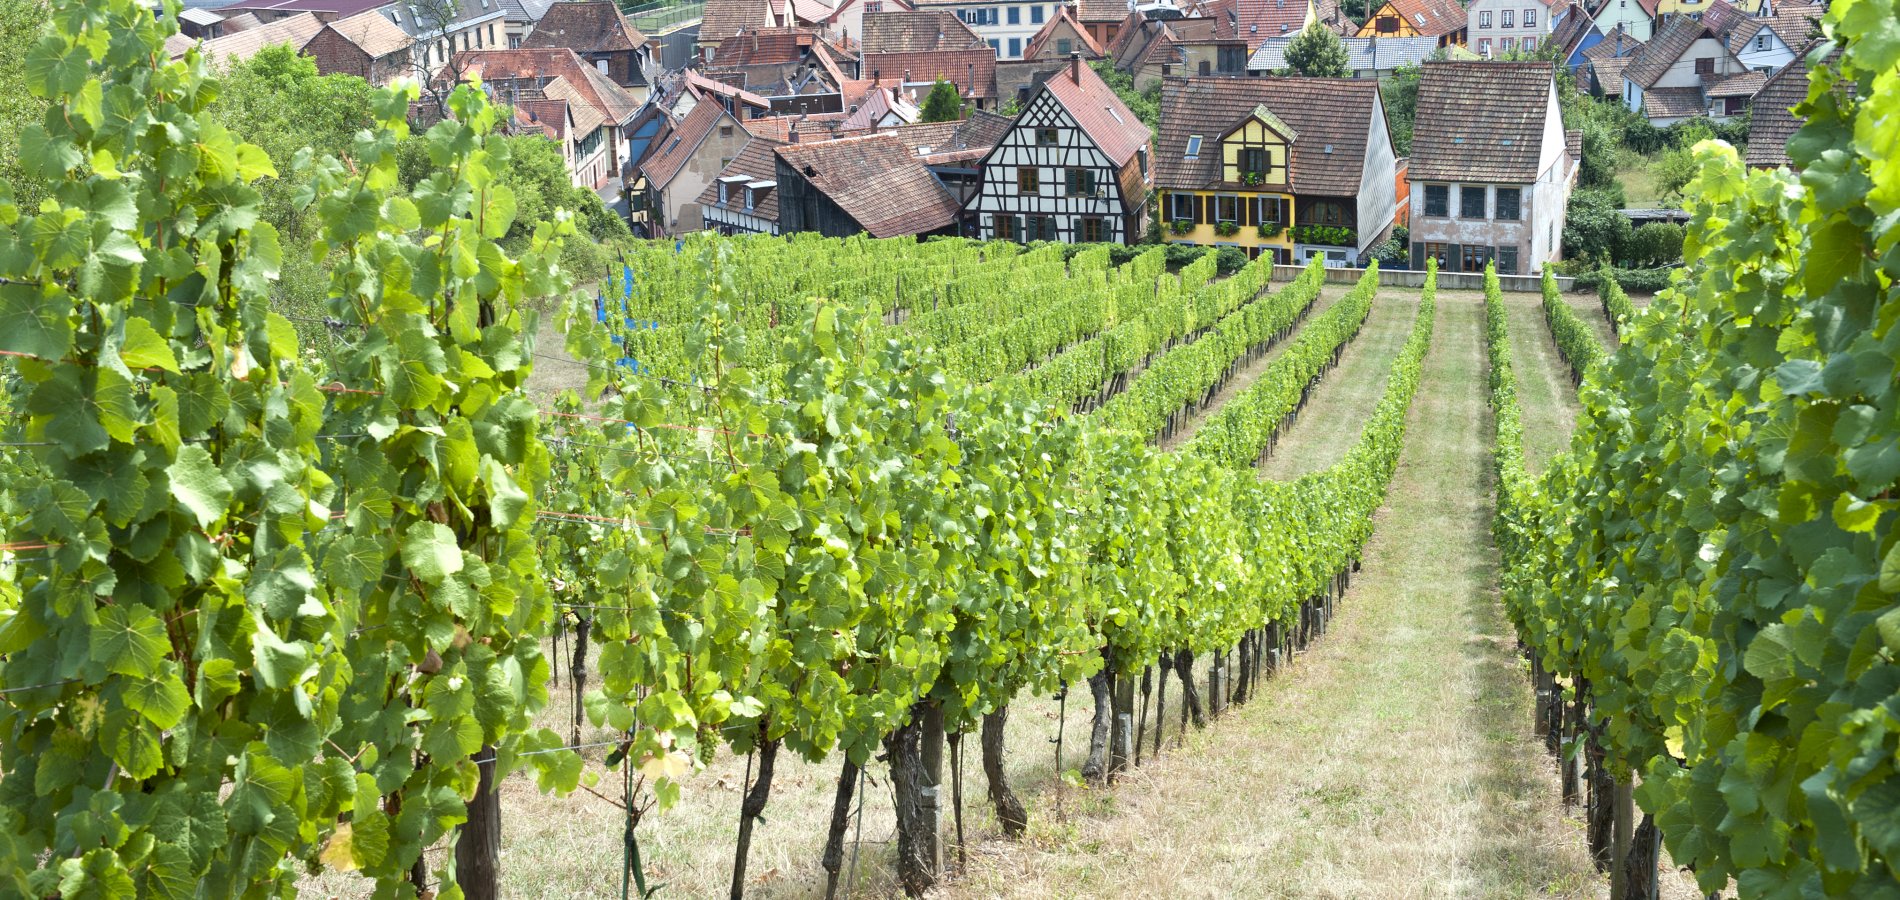 Ophorus Tours - Alsace Villages & Wines Private Half Day Trip From Strasbourg